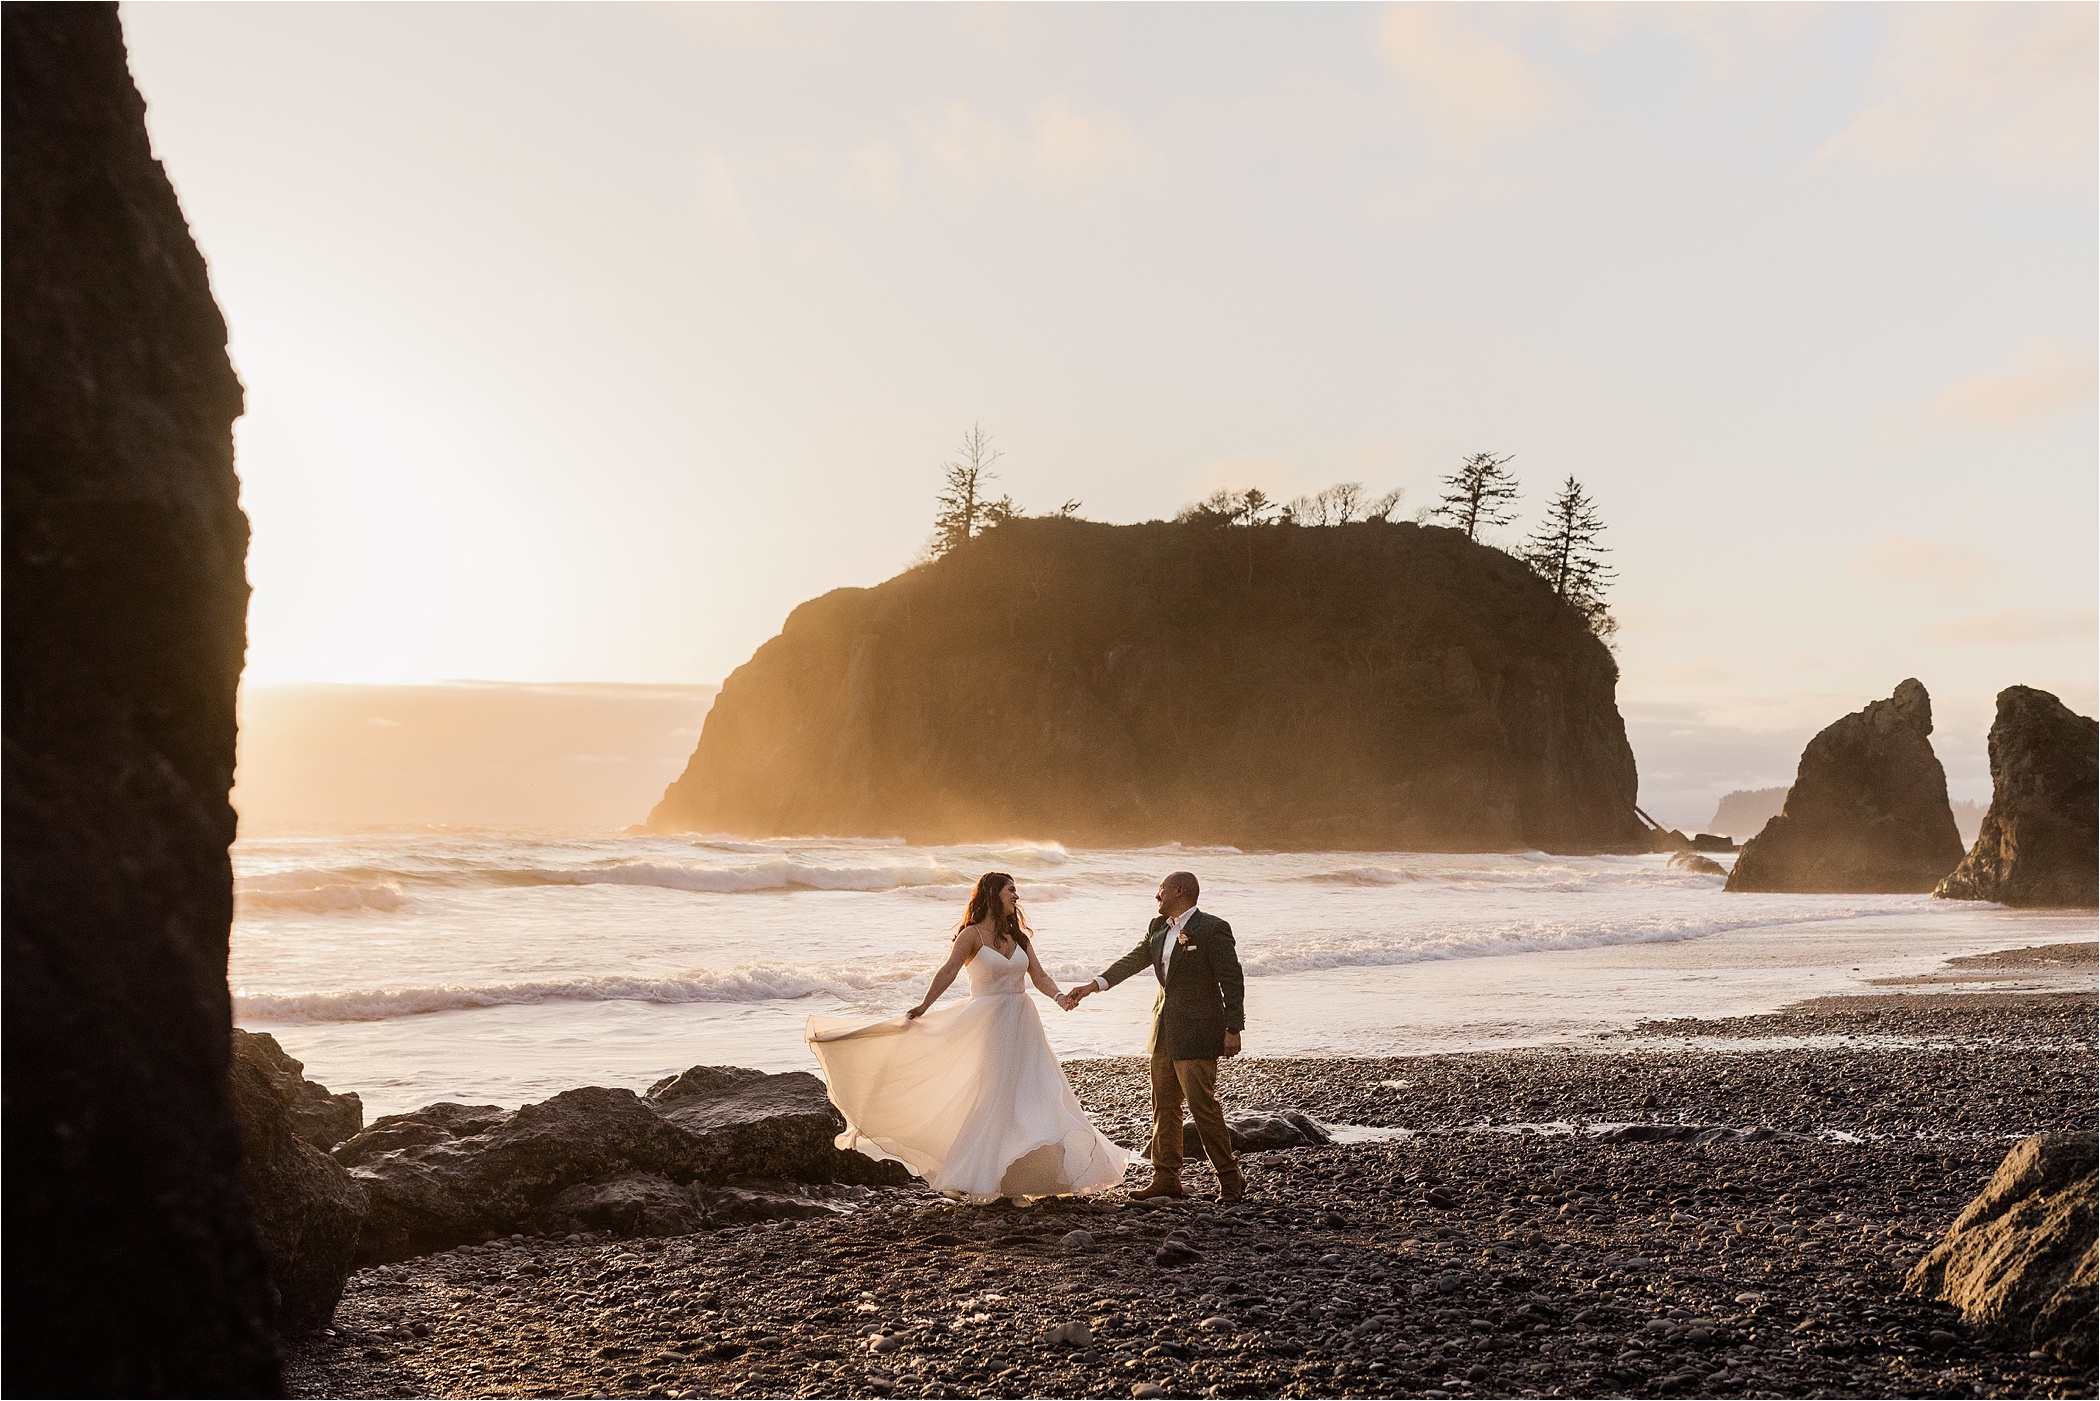 Newly married couple dancing at Ruby Beach during sunset near the ocean.